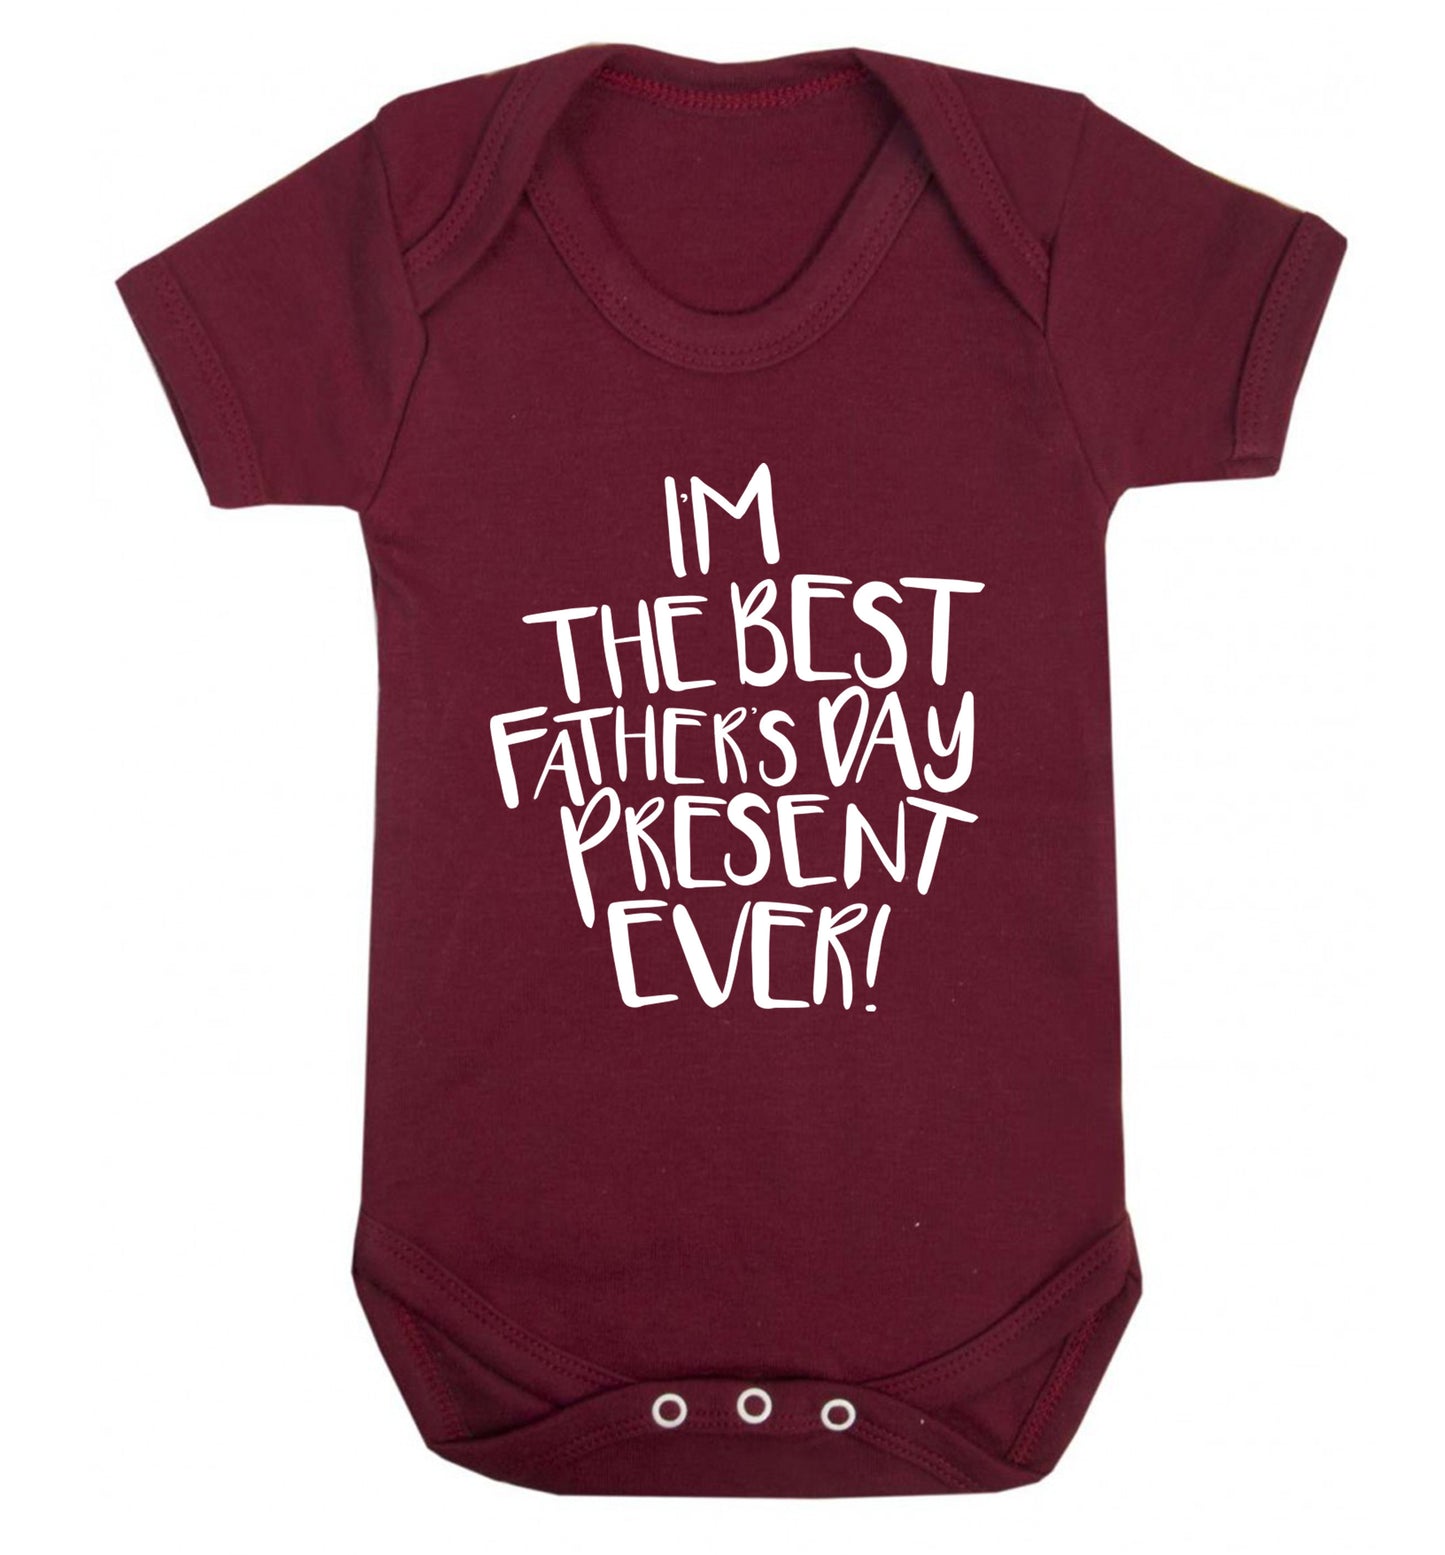 I'm the best father's day present ever! Baby Vest maroon 18-24 months